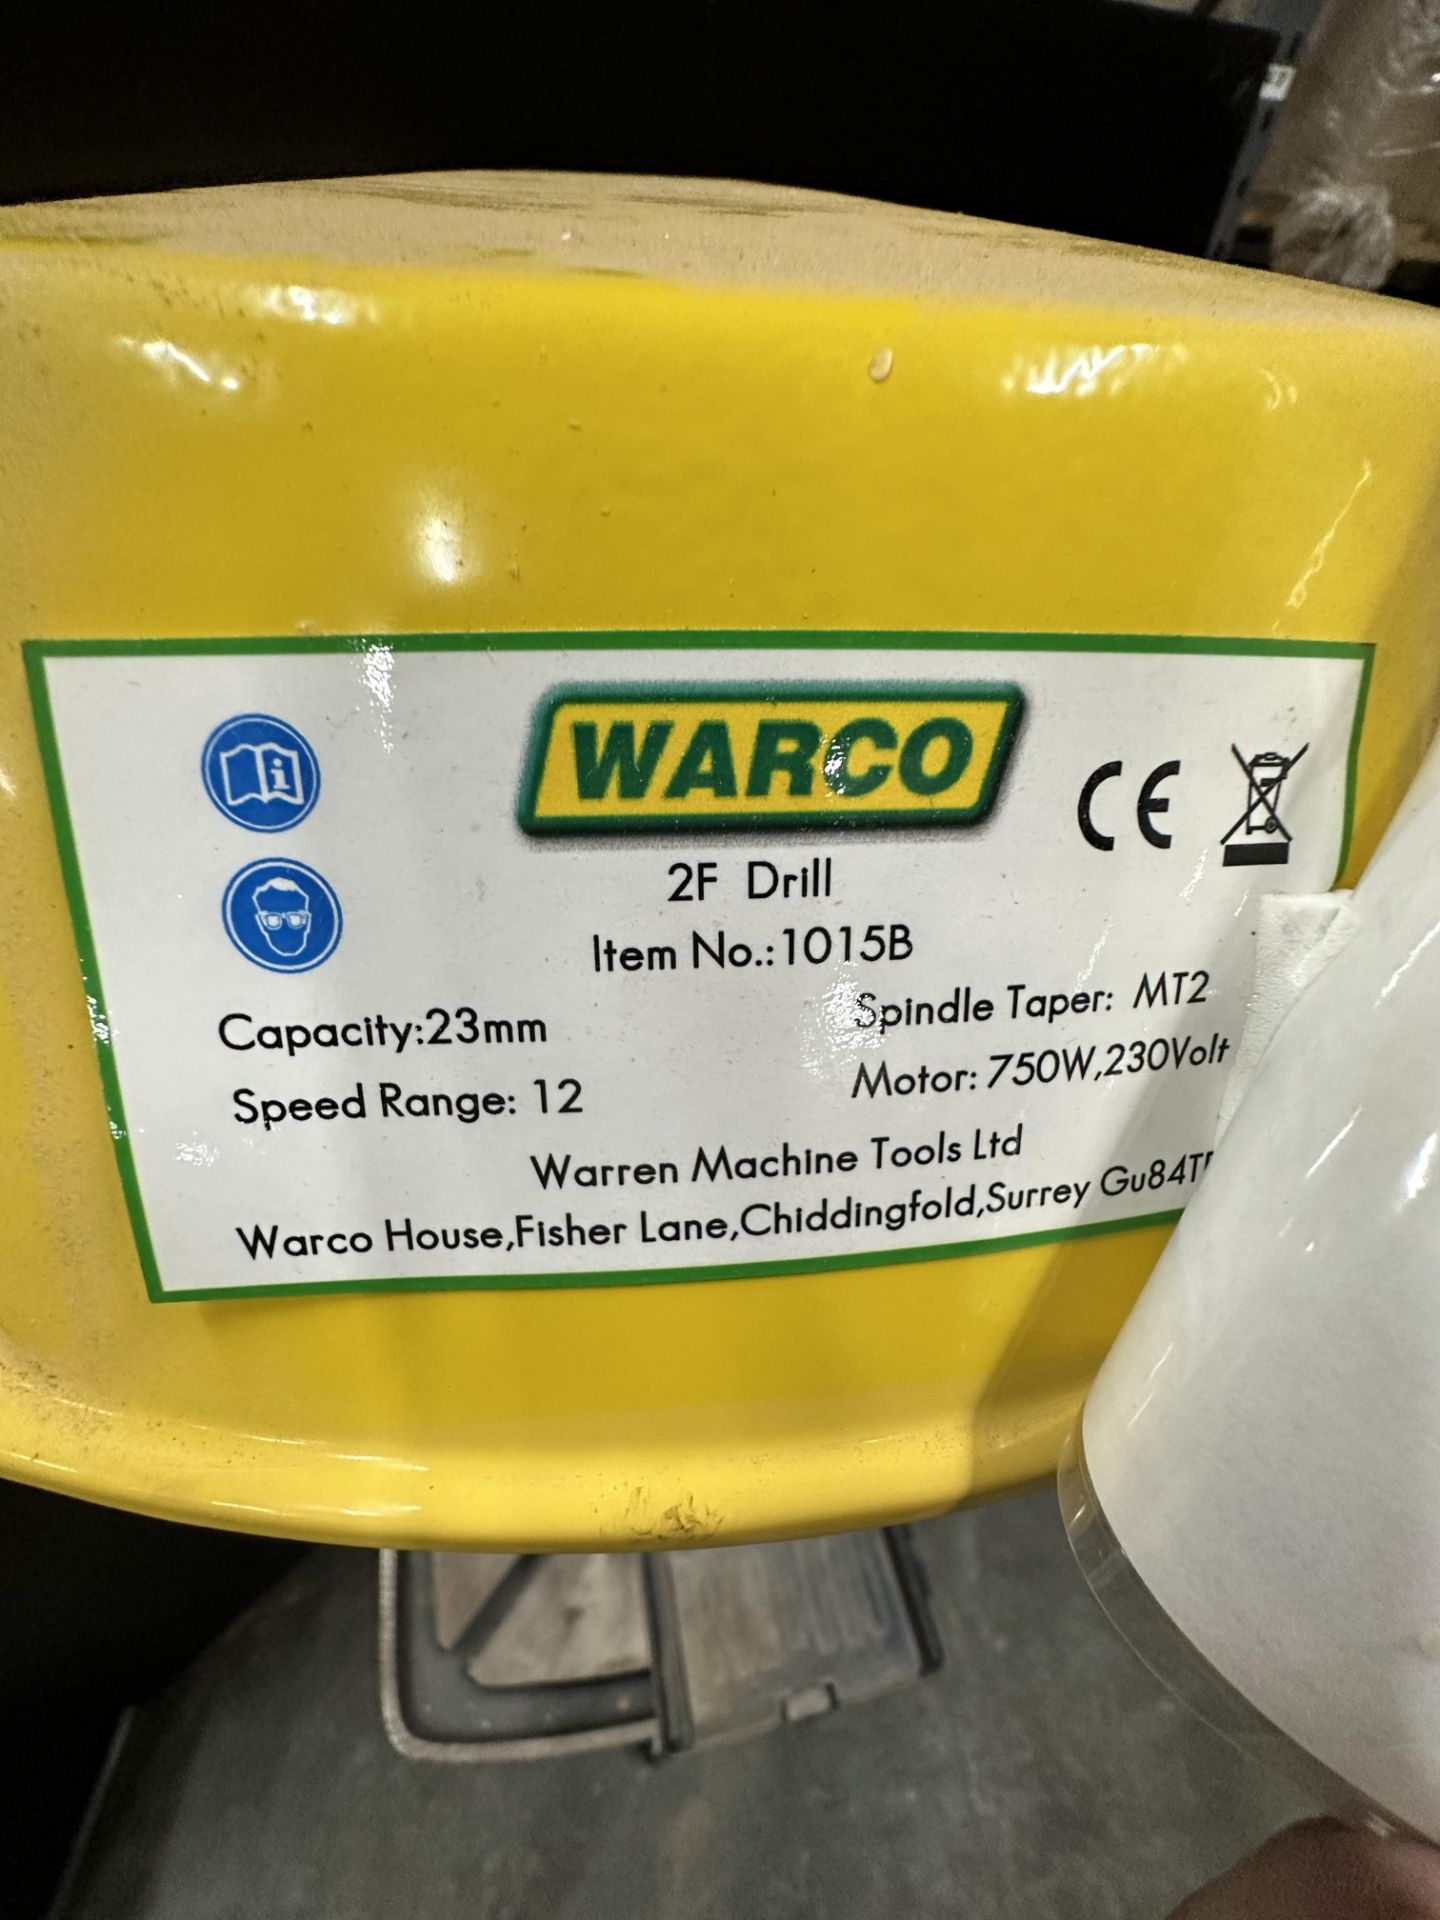 Warco 2F pedestal drill - Image 5 of 5